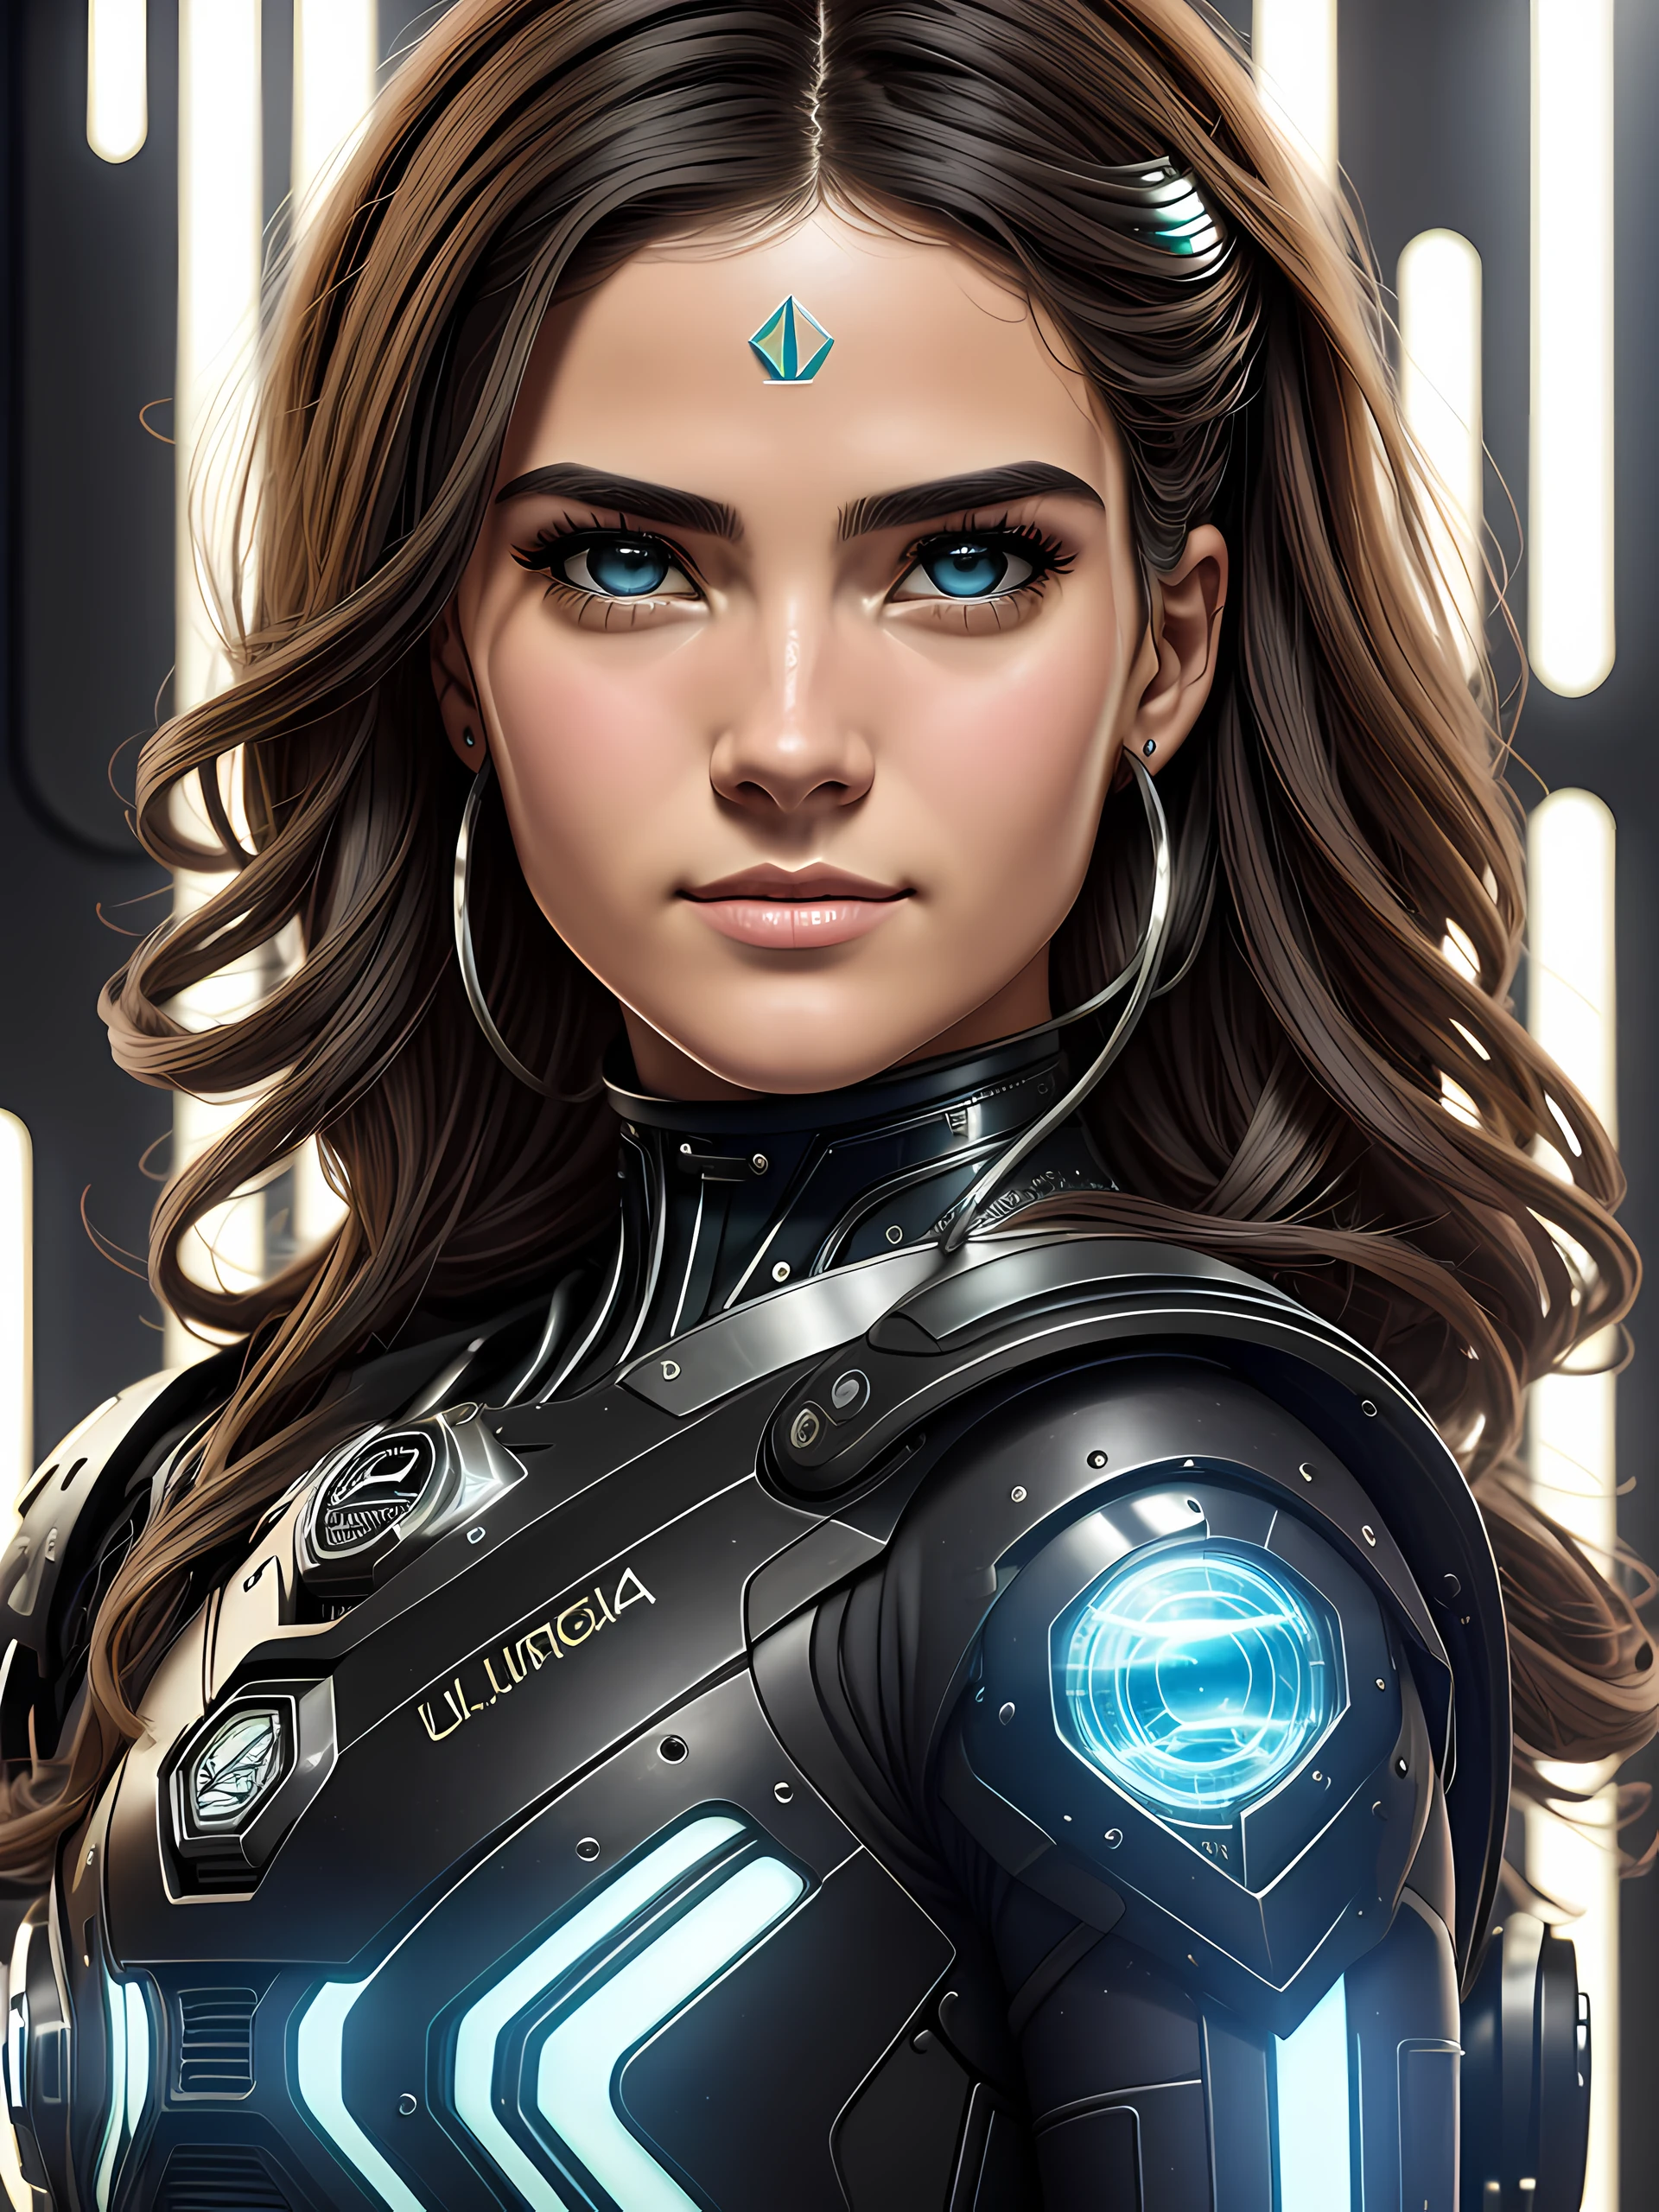 an attractive beautiful woman with blond hair and blue eyes, wearing a sweatshirt，inspired by "Selina Kyle"(highy detailed: 1.2), (canon EOS R6 best quality: 1.2), (8k: 1.0), (emb-rrf-low: 1.0), (lots of large black tattoos on open cybernetic head in the middle showing the inside, face detailed, Hyper-detailed eyes and use of high-tech sunglasses with holographic display 1.2), sharp focus (awarded photo: 1.2), (subsurface scatter: 1.2), (subsurface scatter: 1.2). 1.1) (a beautiful ultra-detailed cyborg: 1.2), ( hyper-detailed hair: 1.2), (wonderful body: 1.2), (fully body: 1.2), (Dynamic Stance :1.2), neon glow, (Detailed cybernetic eyes:1.1), Close-up (hyperrealisti:1.2), RPG, cyberpunk style 2077, dramatic lighting, (highly detailed futuristic cityscape:1.2), (scientific fiction: 1.2). 1.2), professional portrait photograph, por WLOP greg rutkowski, Jeffrey Simpson, Alphonse Mucha's